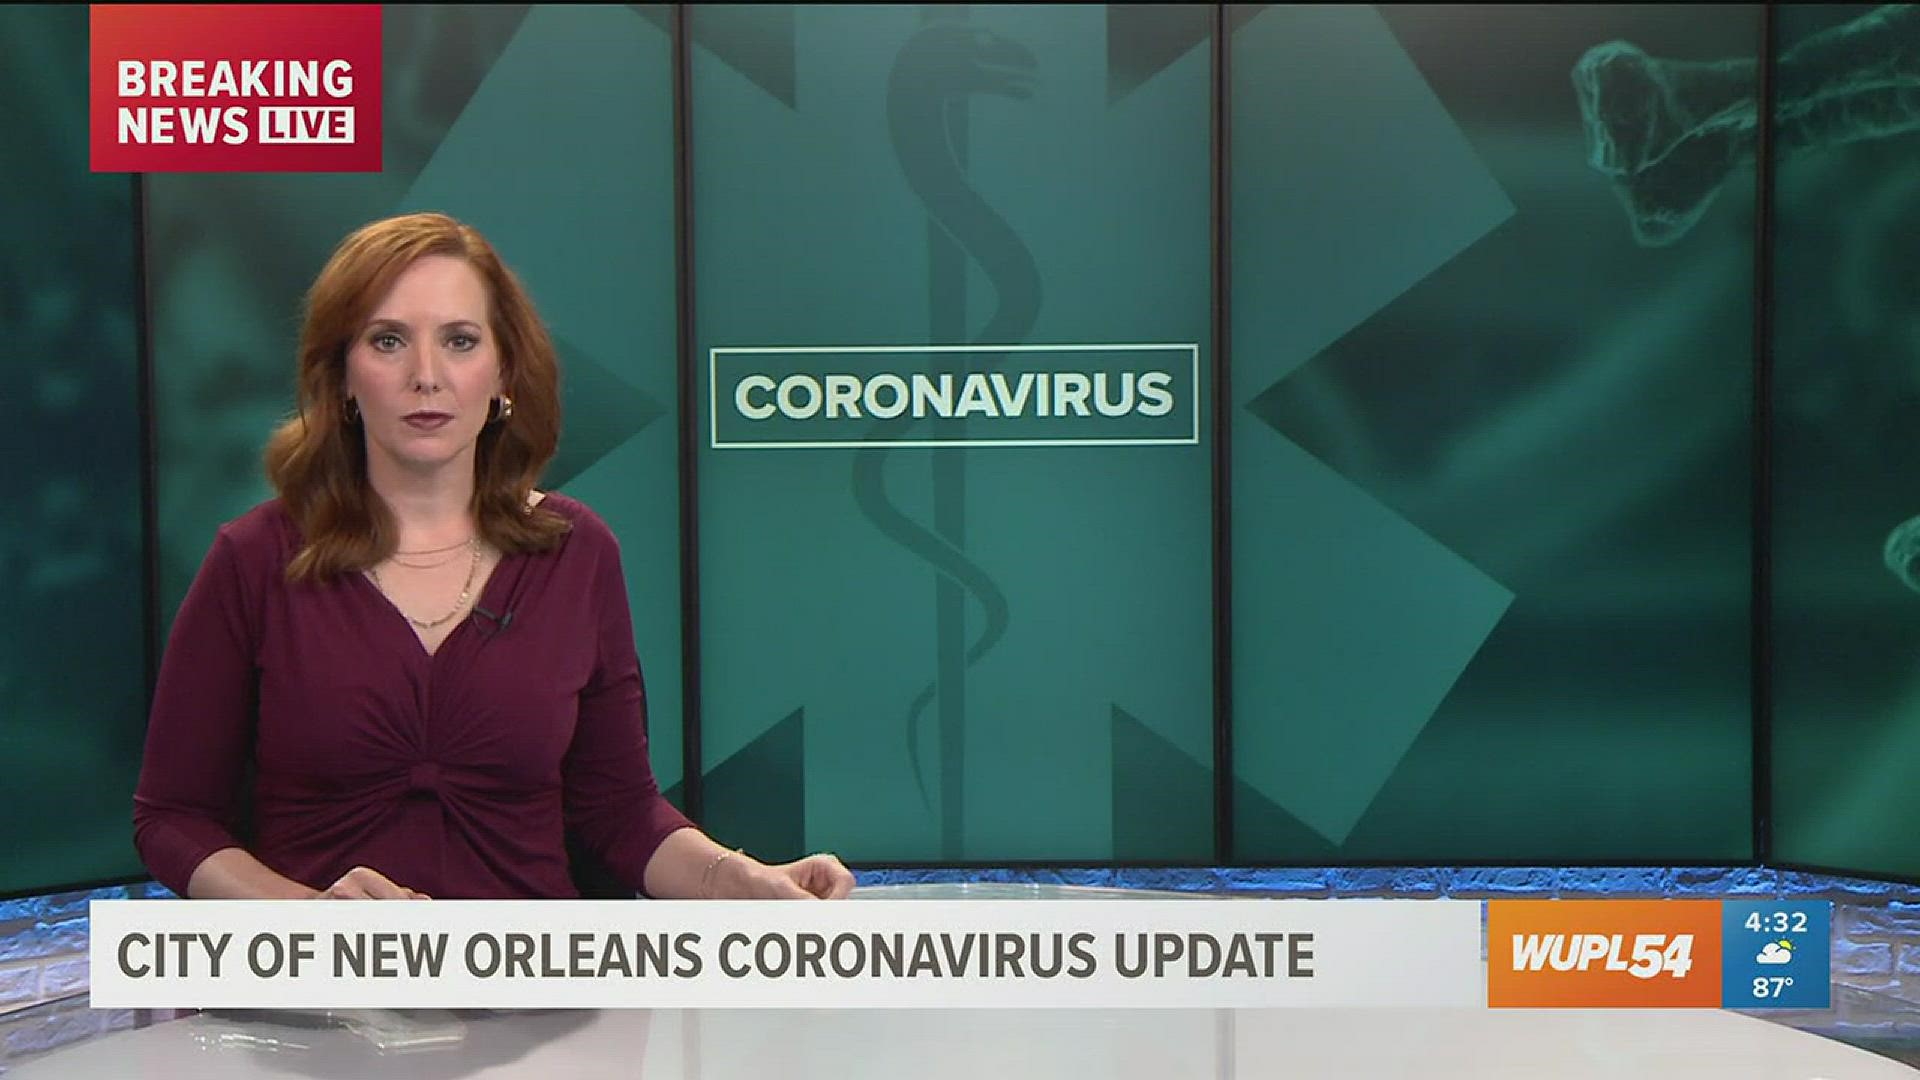 Thousands of coronavirus tests have been administered so far in the Greater New Orleans area.